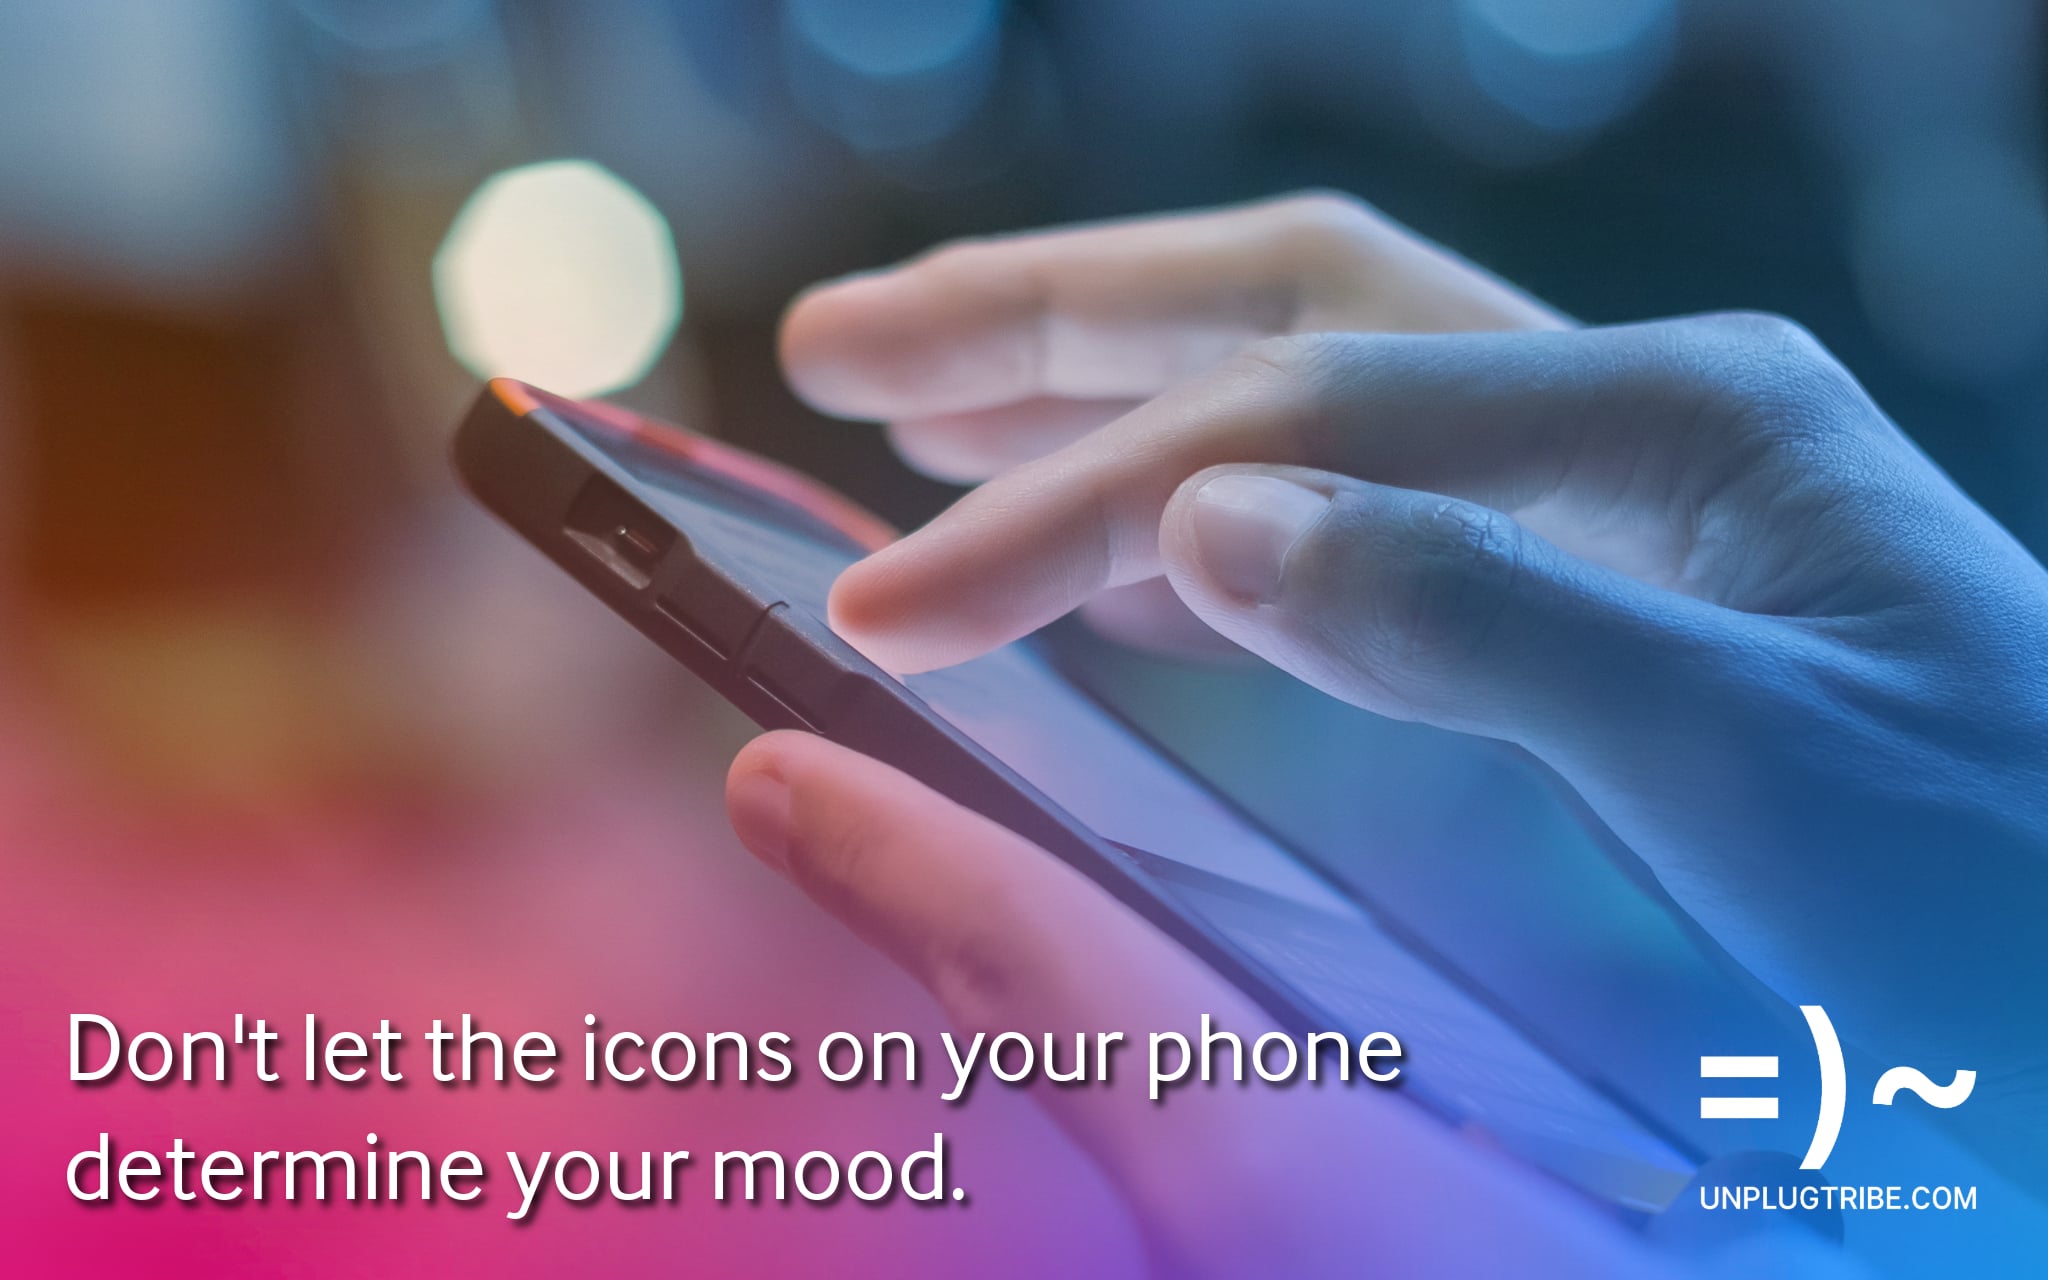 Don't let the icons on your phone determine your mood